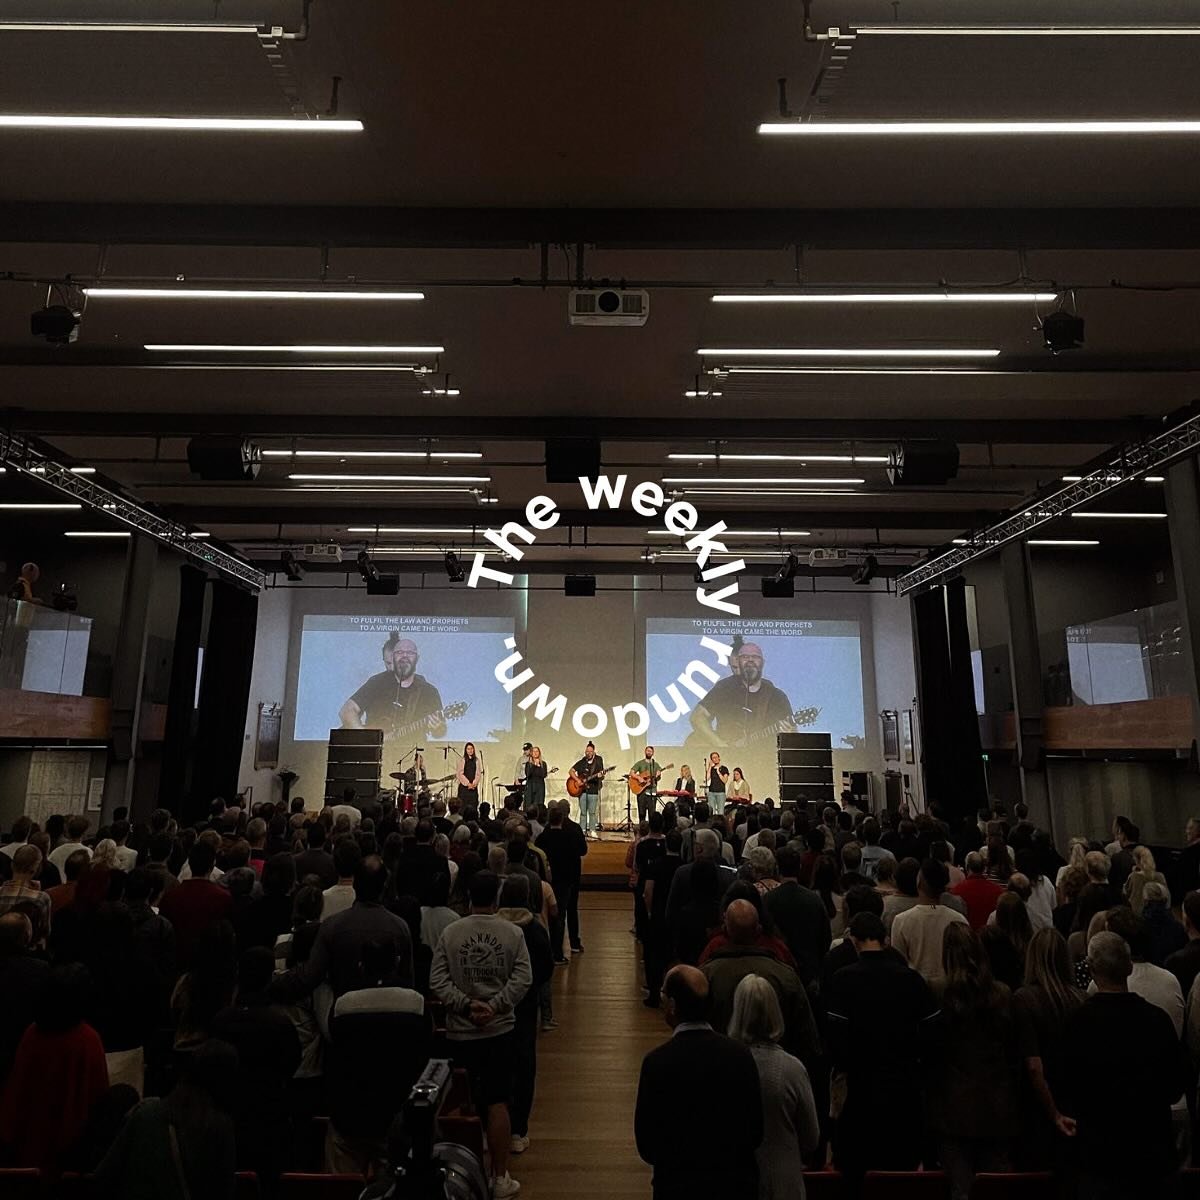 We had a great time together with all locations of The Street Church yesterday!!

Spend some time this week soaking in Isaiah 40 - remember when you are weary or things feel out of control, you can trust our incredible God who is in control.

📸 Kath